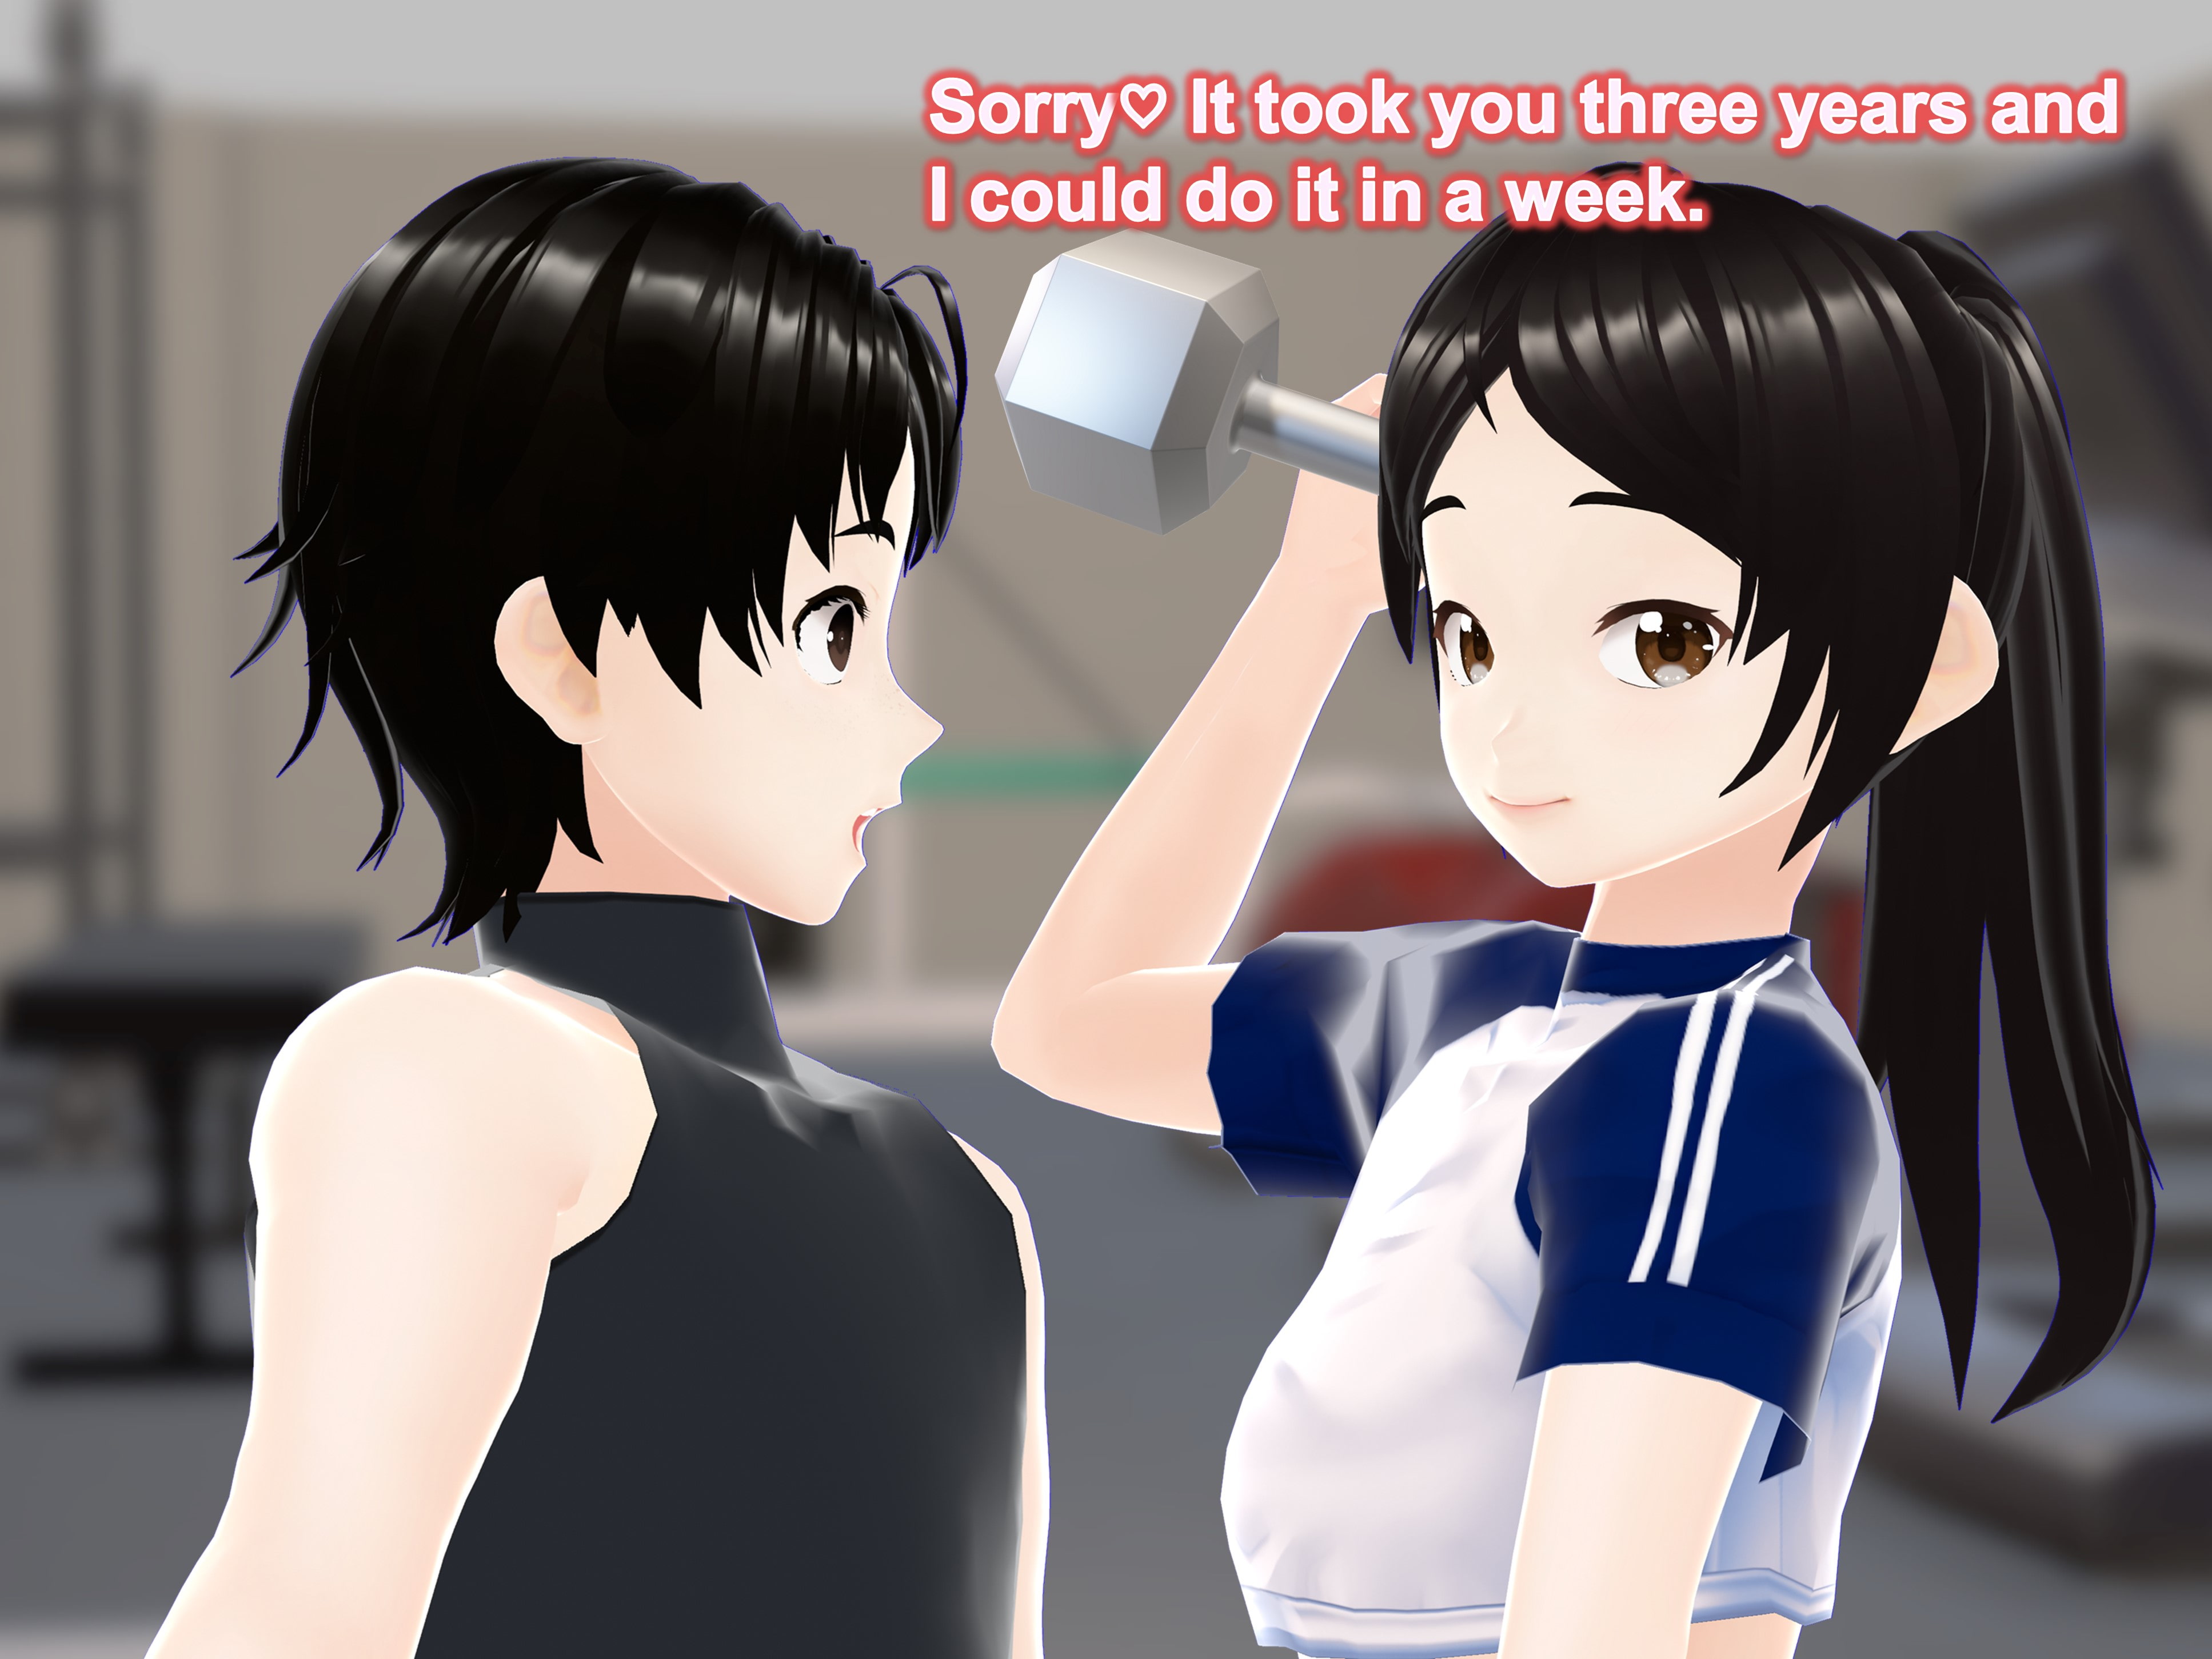 Outgrowing only girls, Overtake boys, Growth sound in the gym [女子成長クラブ]